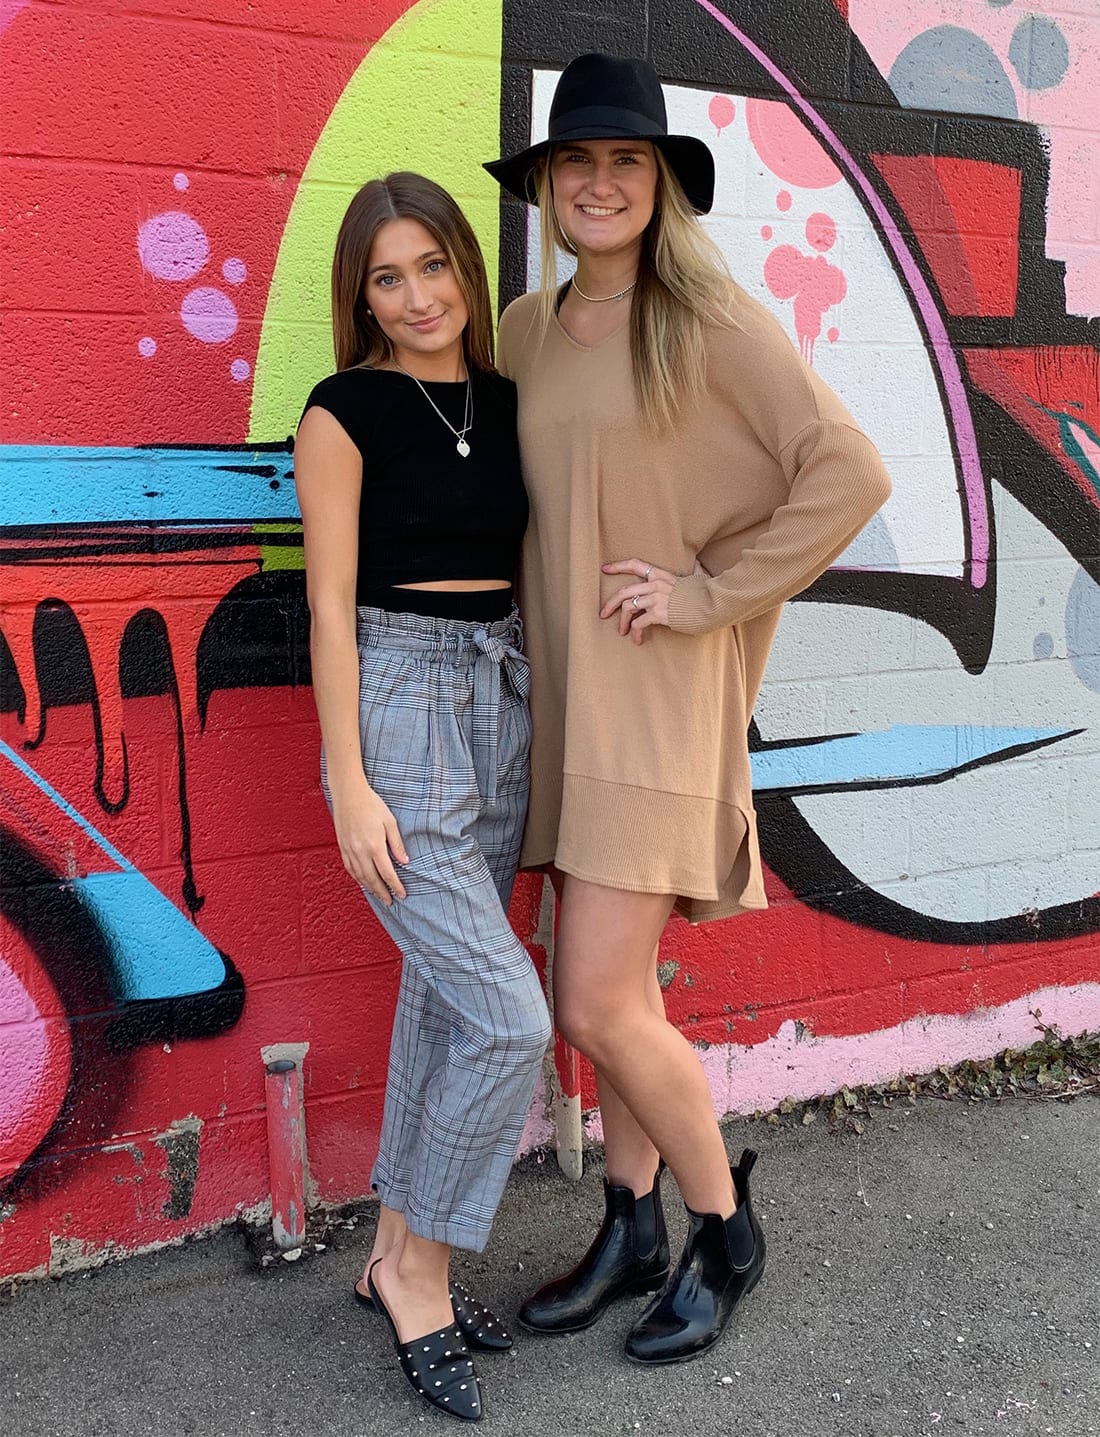 Broad students Jackie Smythe and Olivia Miller stand together in front of a brightly painted brick wall.